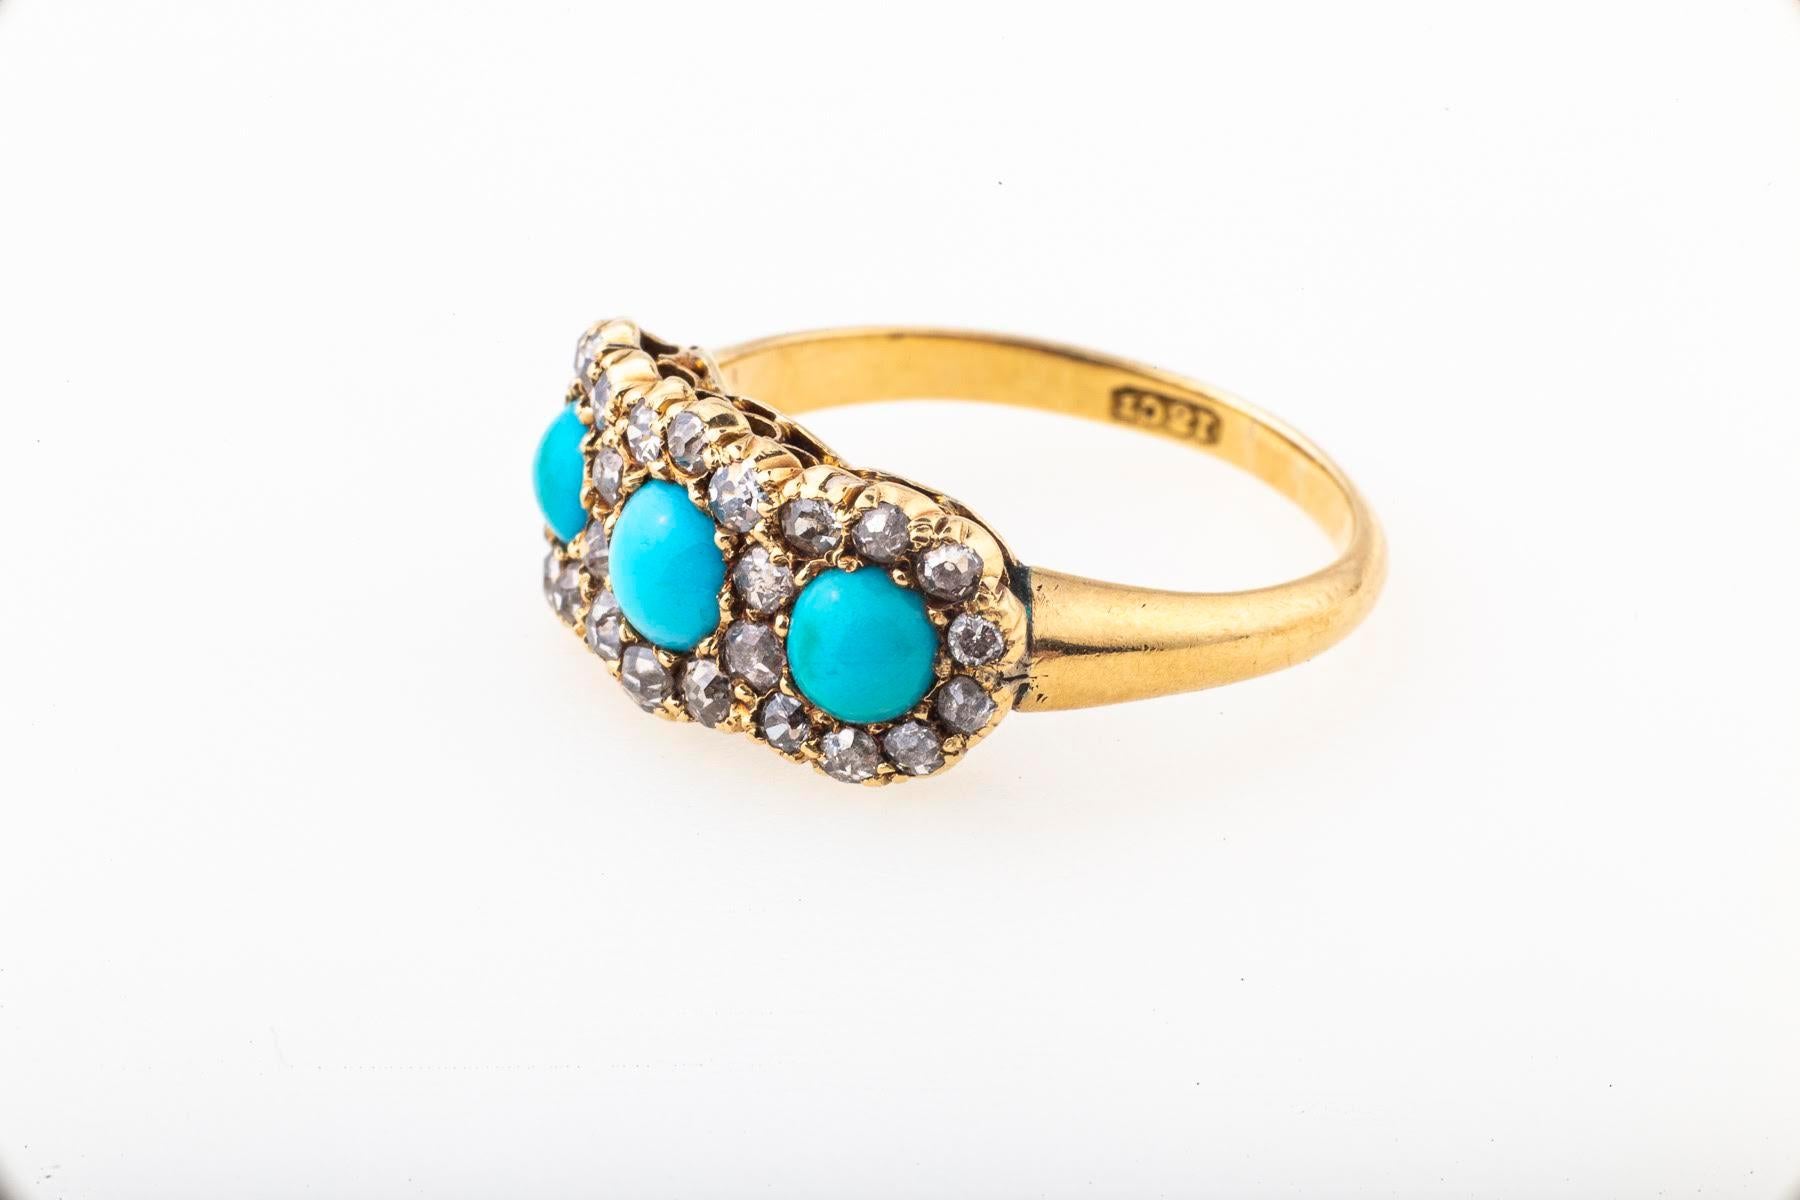 A perfect Turquoise and Diamond Ring that brings sparkles of delight from the Victorian era in England. The turquoise gems are round interspersed with old european round diamonds forming three floral settings. Turquoise was a favored gem of the